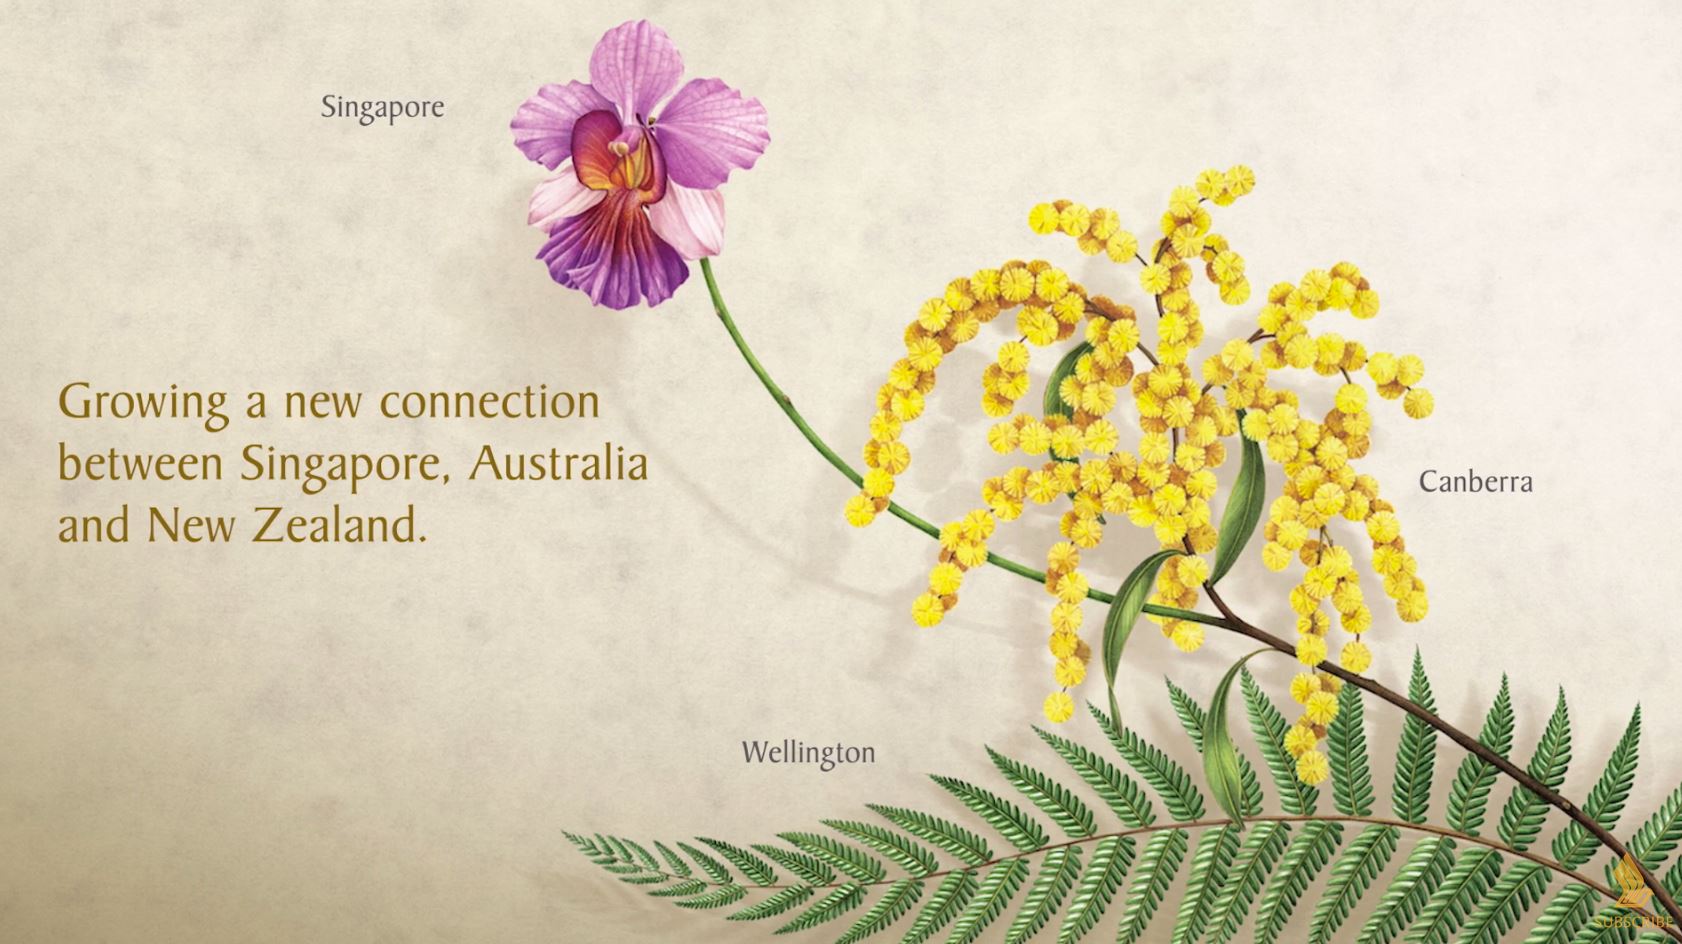 Growing A New Connection Between Singapore, Australia & New Zealand